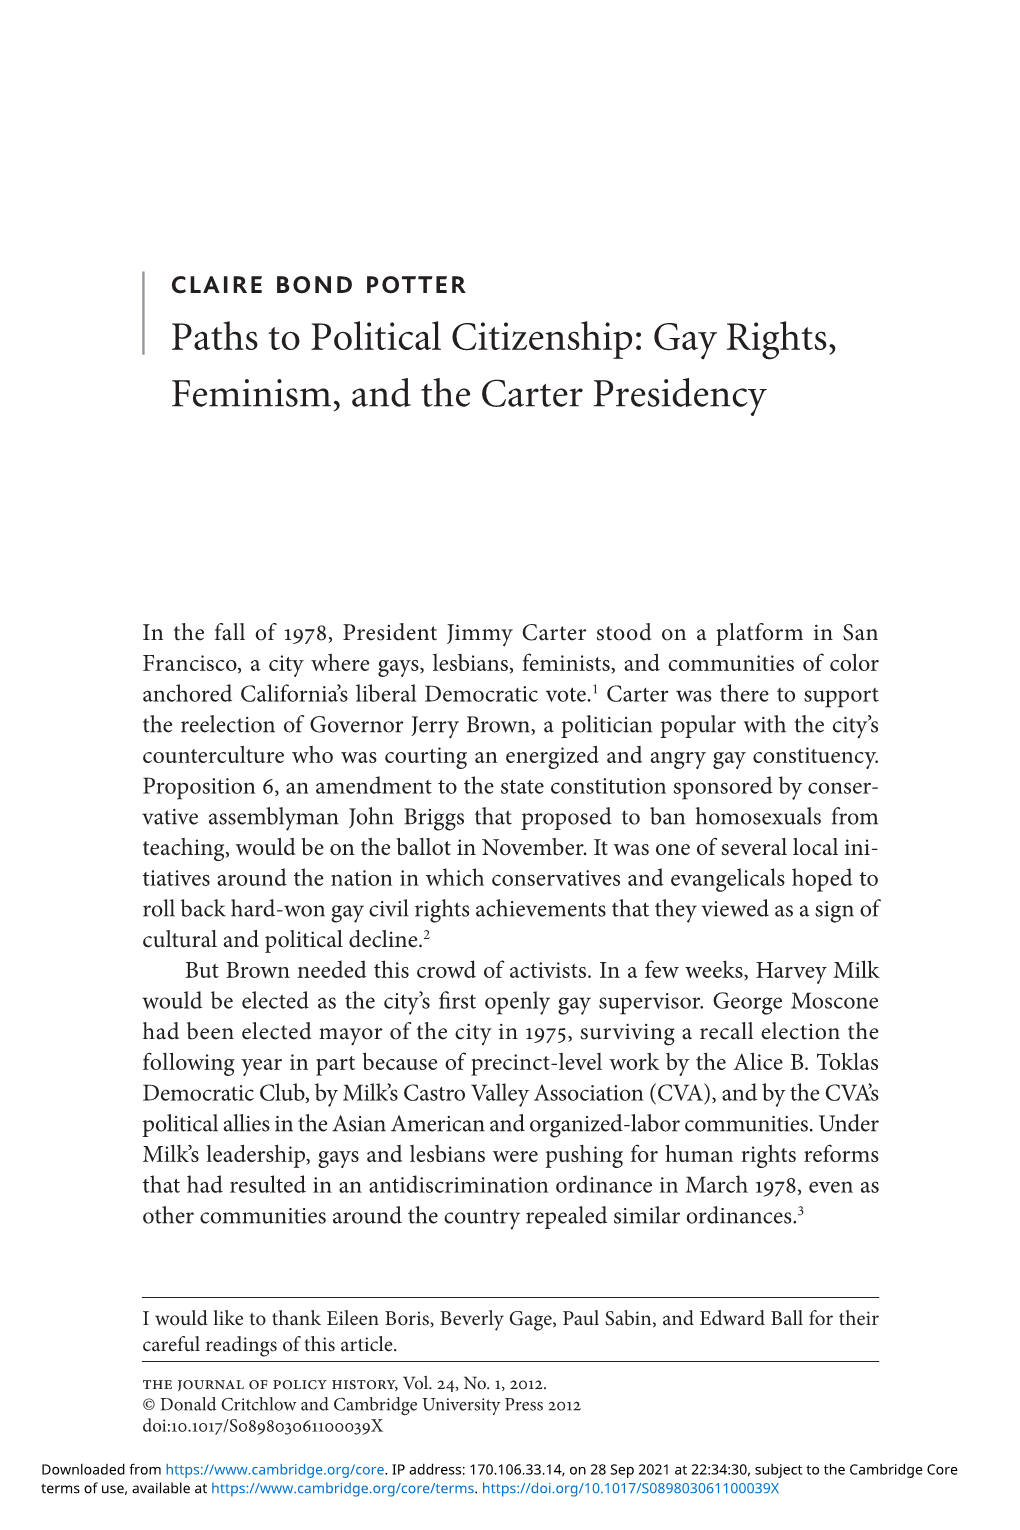 Gay Rights, Feminism, and the Carter Presidency